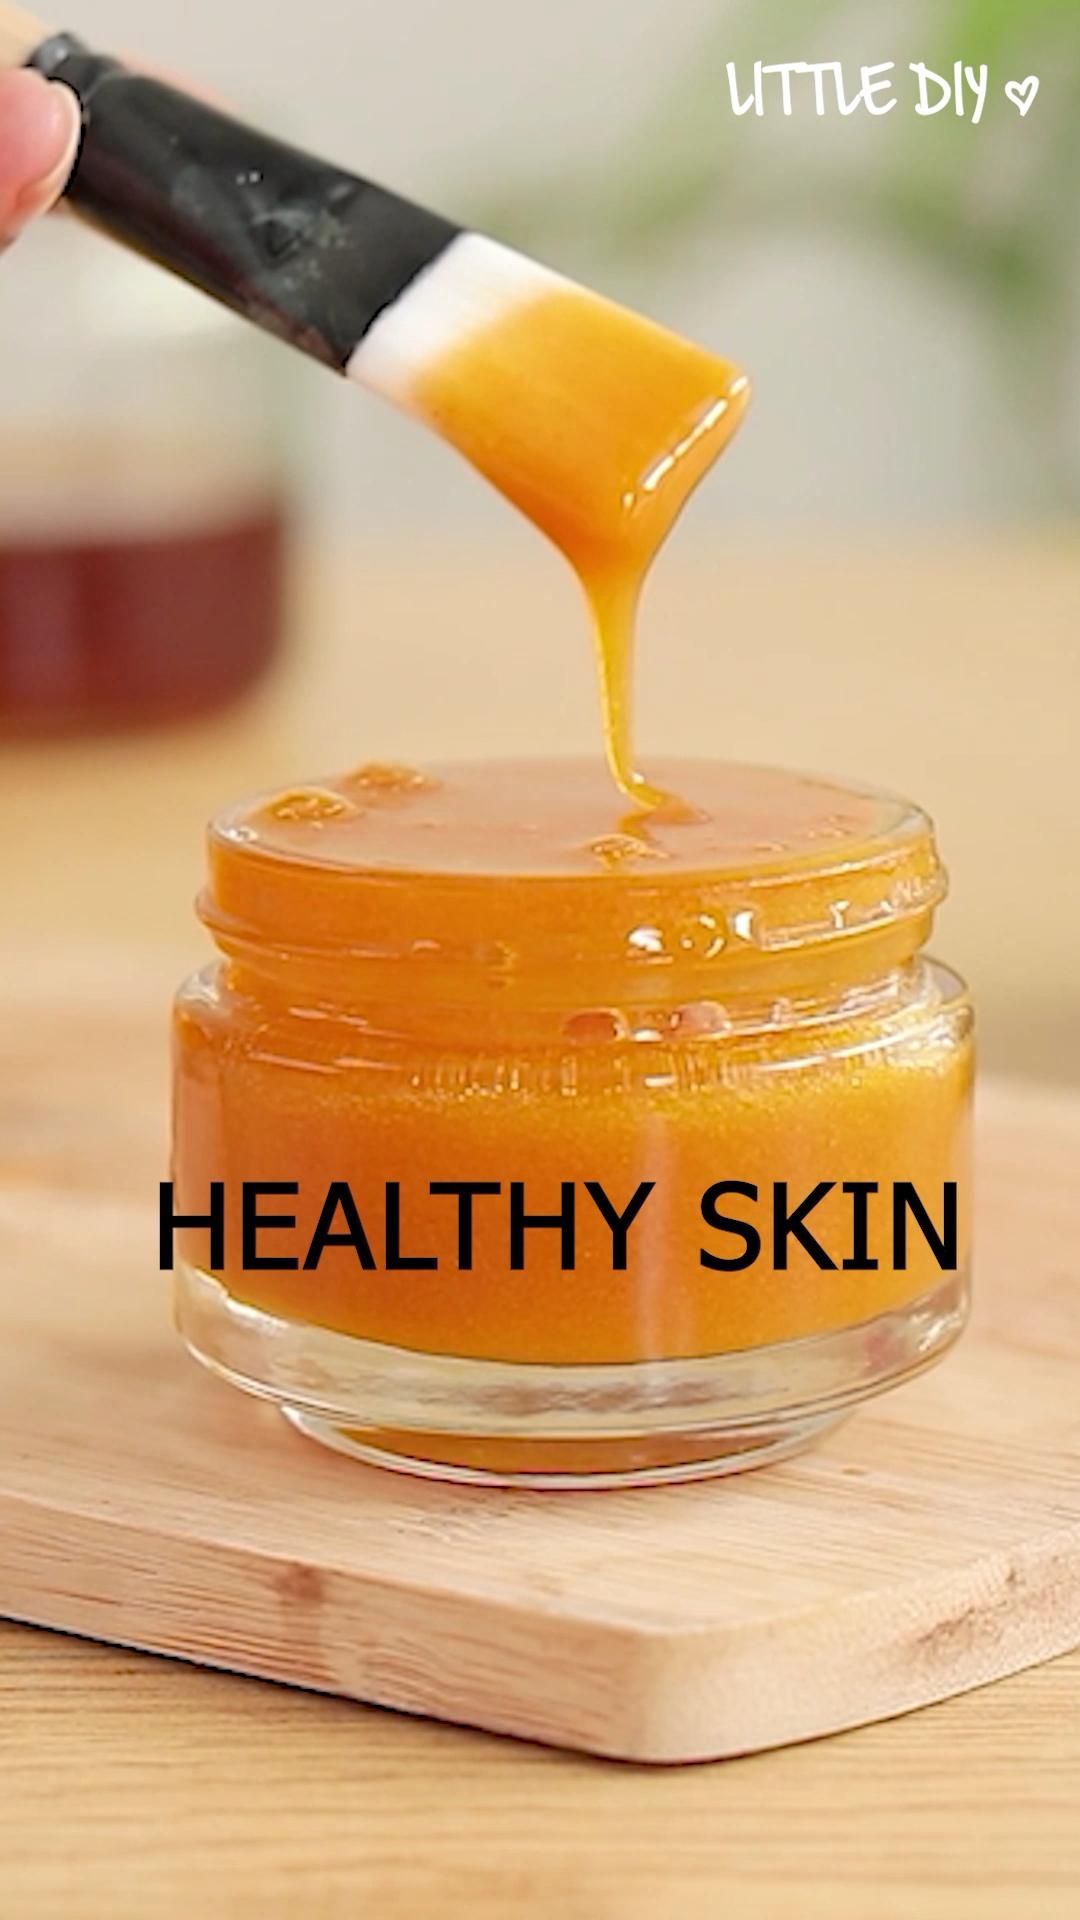 Use honey for clear, healthy and glowing skin - honey-turmeric mask/ honey-oil mask - YouTube -   17 beauty Skin mask ideas